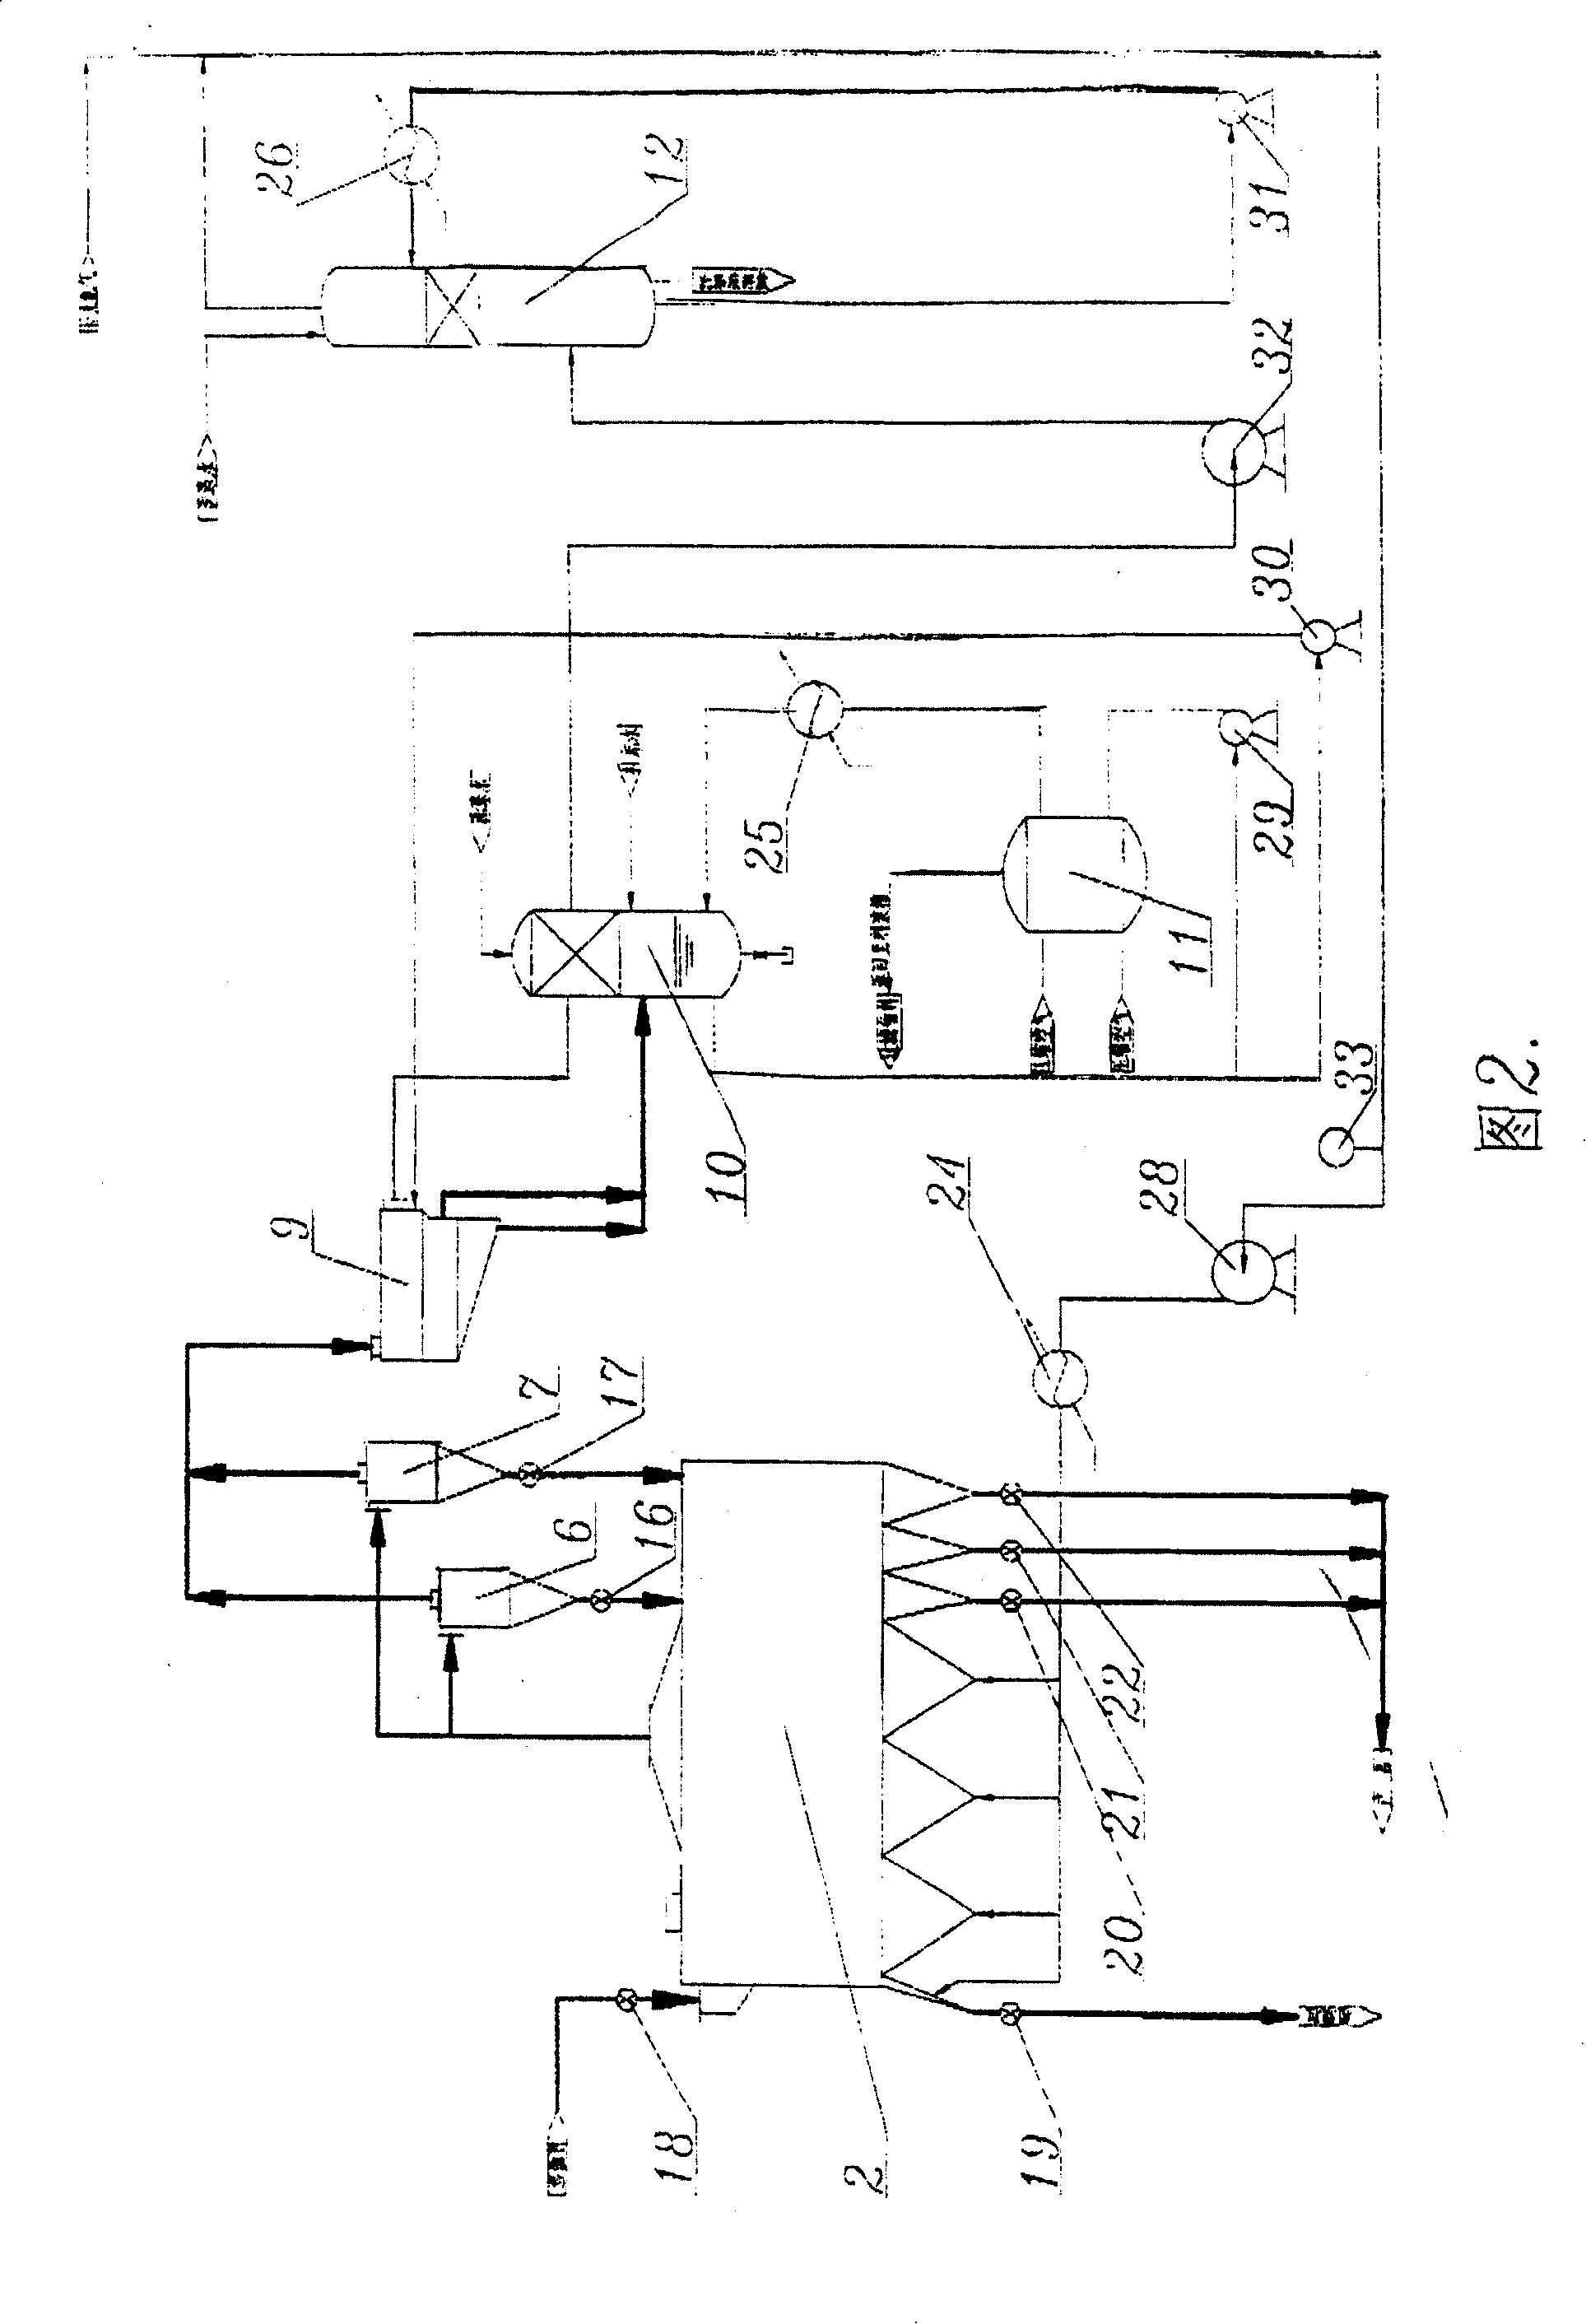 Nitrogen-cycle engineering plastic air current and fluidized bed drying method